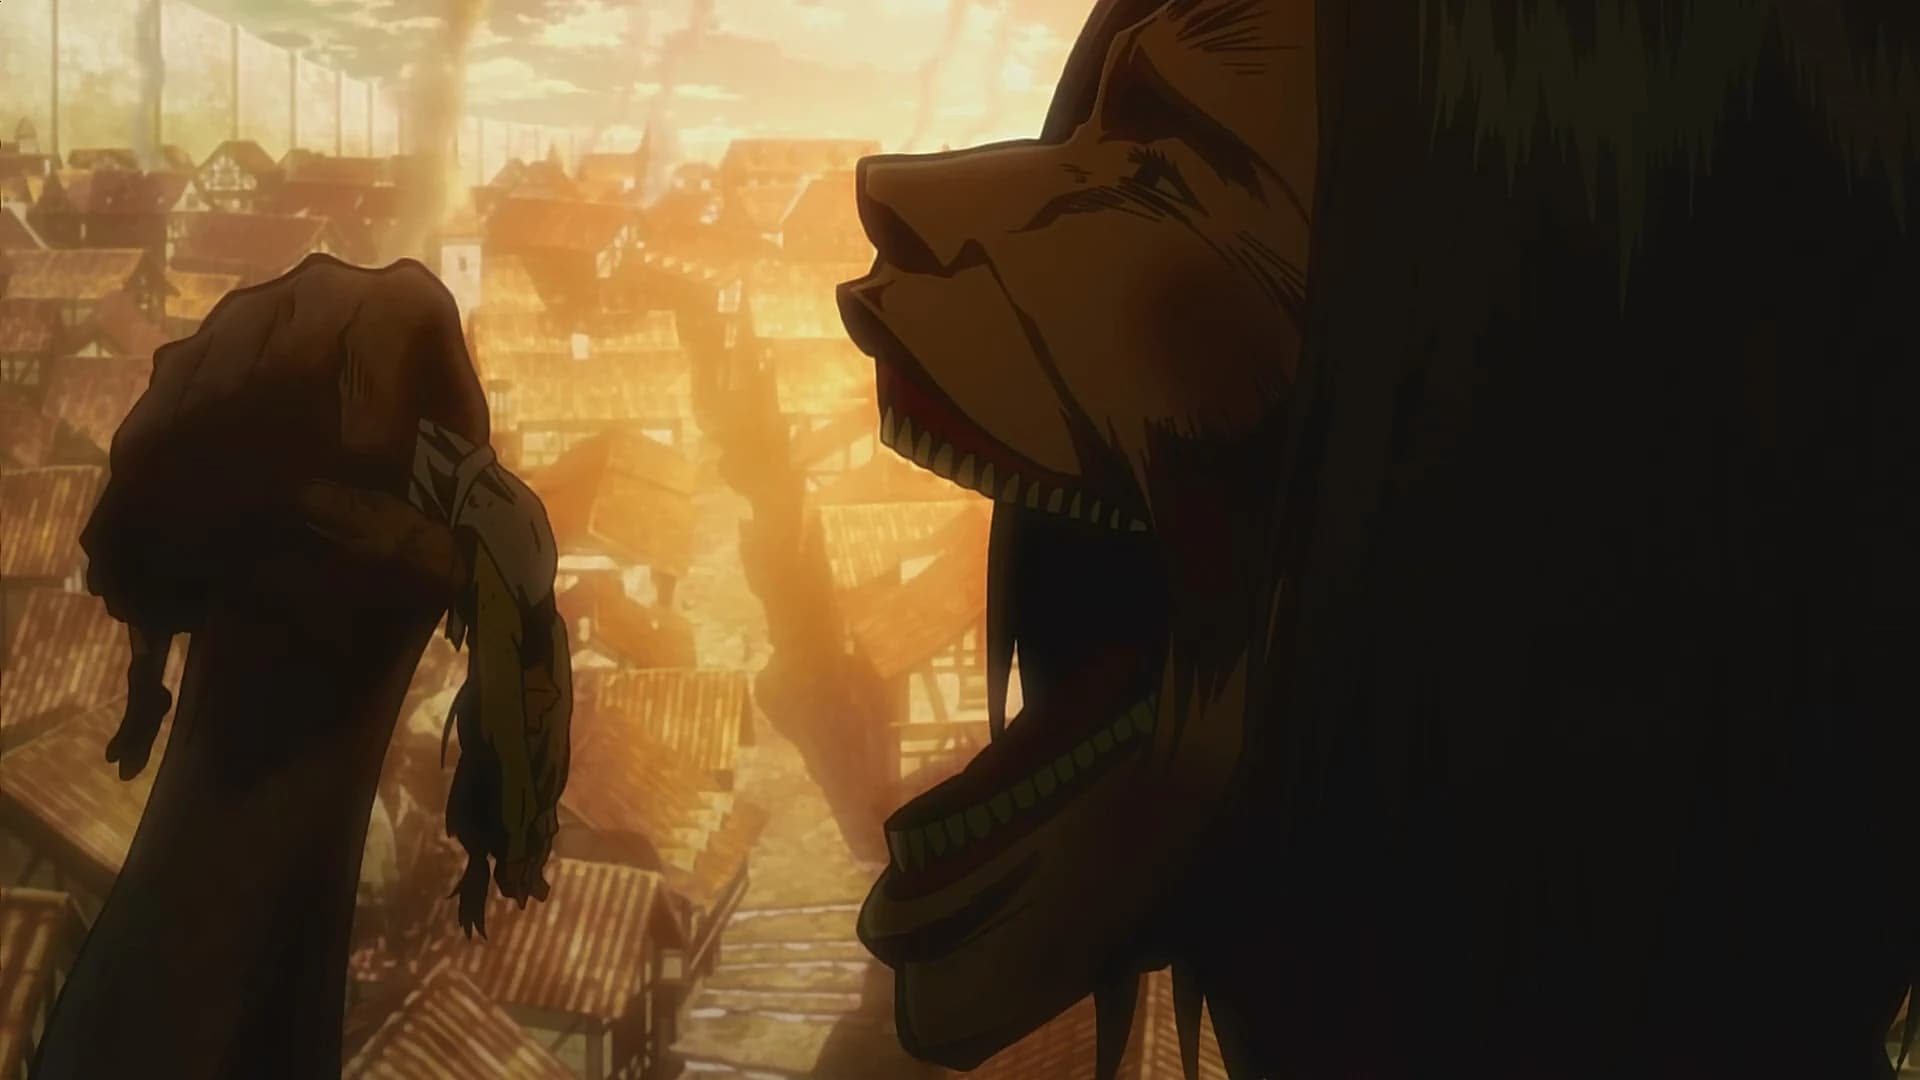 The 20 Most Jaw-Dropping Plot Twists in 'Attack on Titan